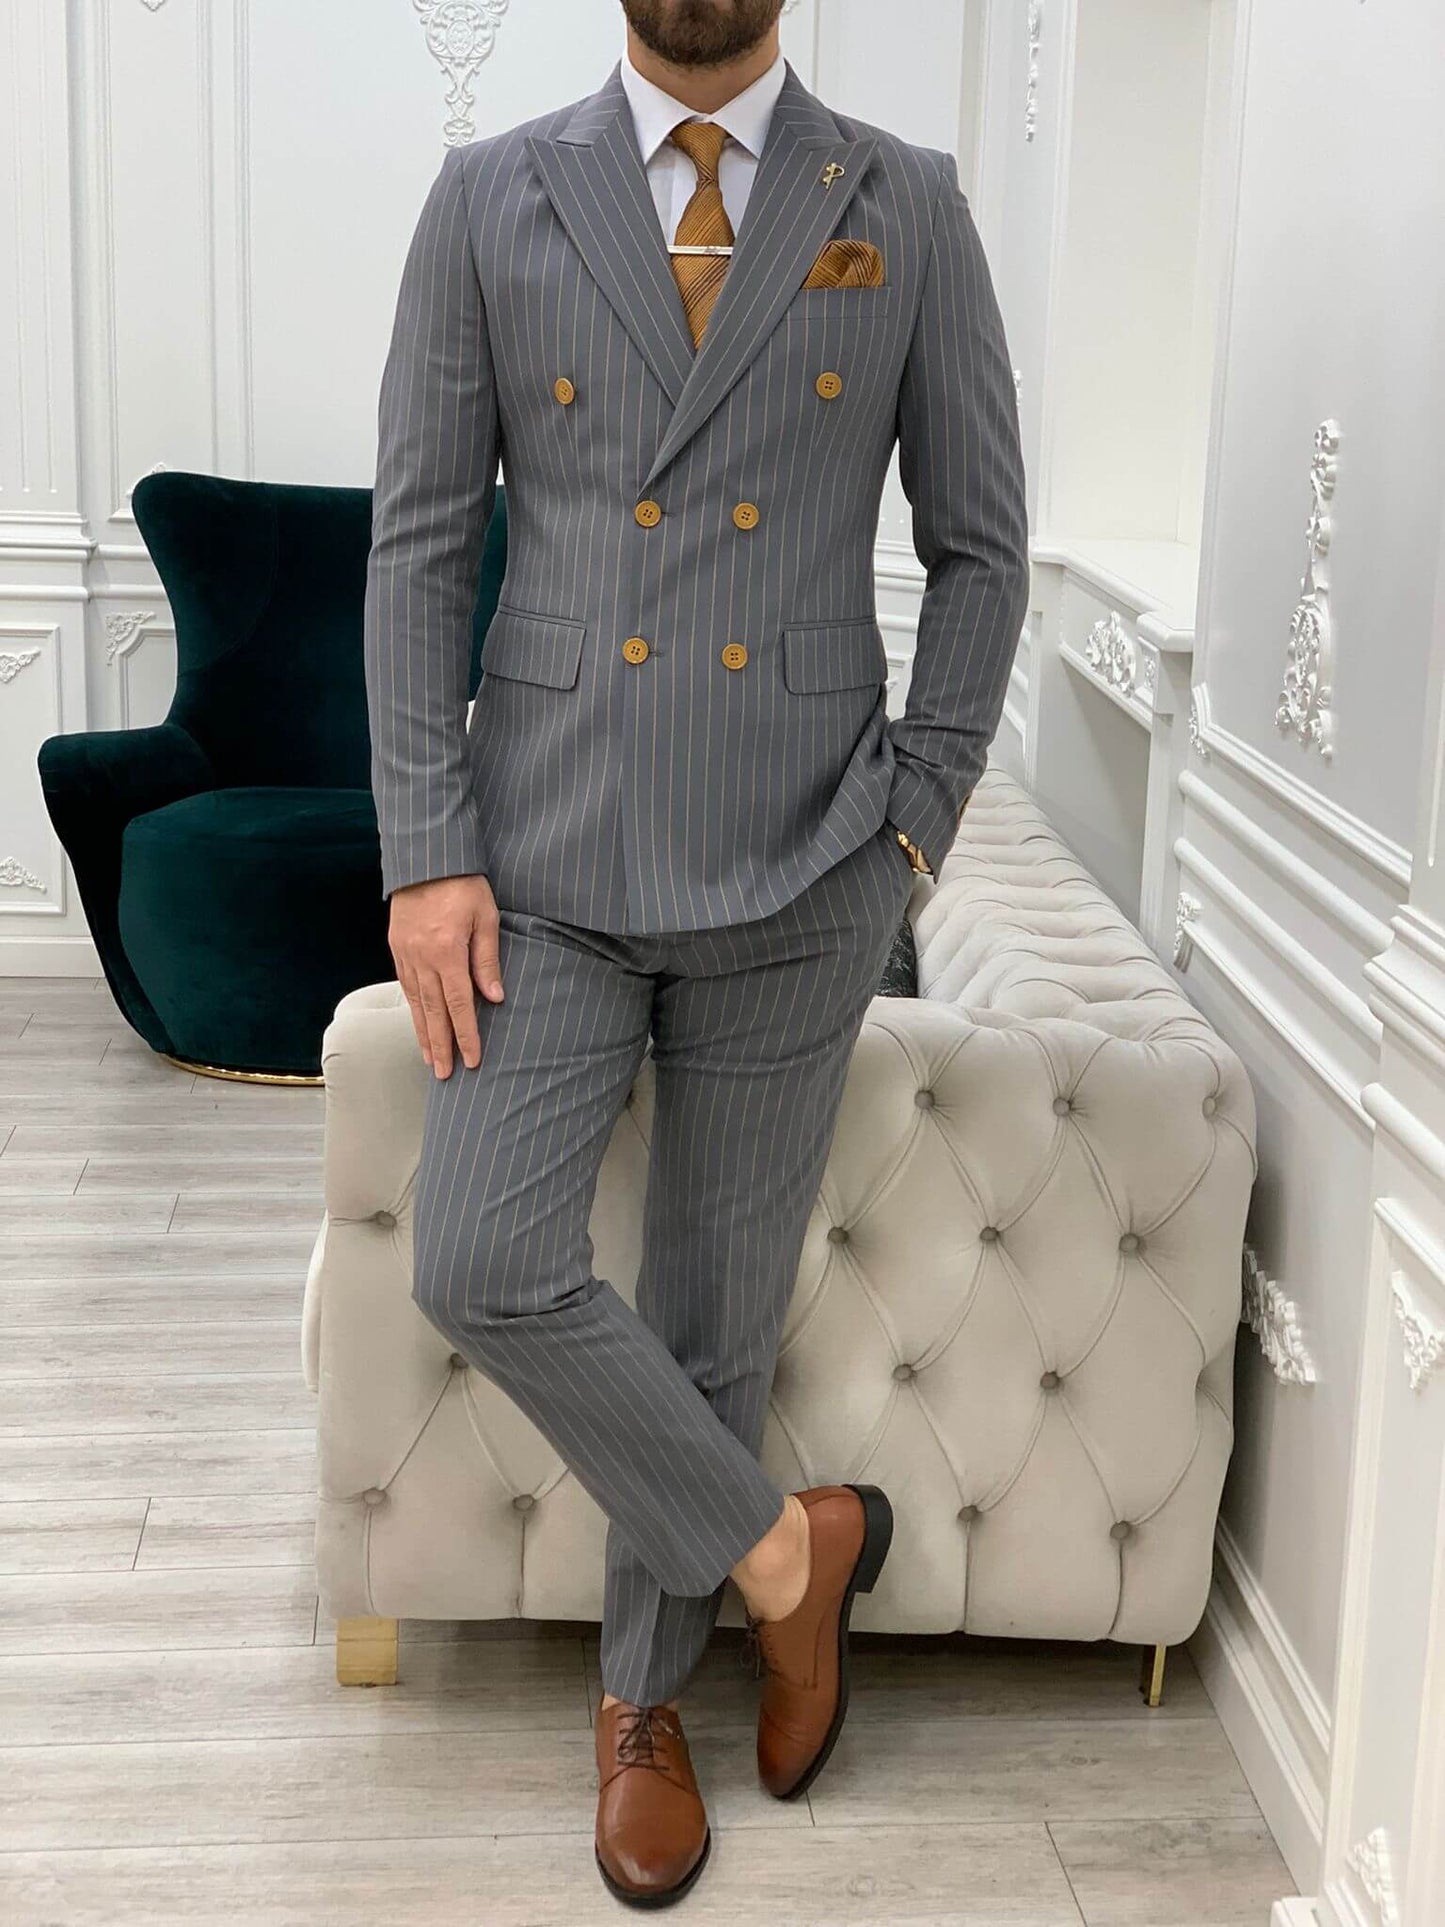 Pinstripe Gray  Double Breasted Suit